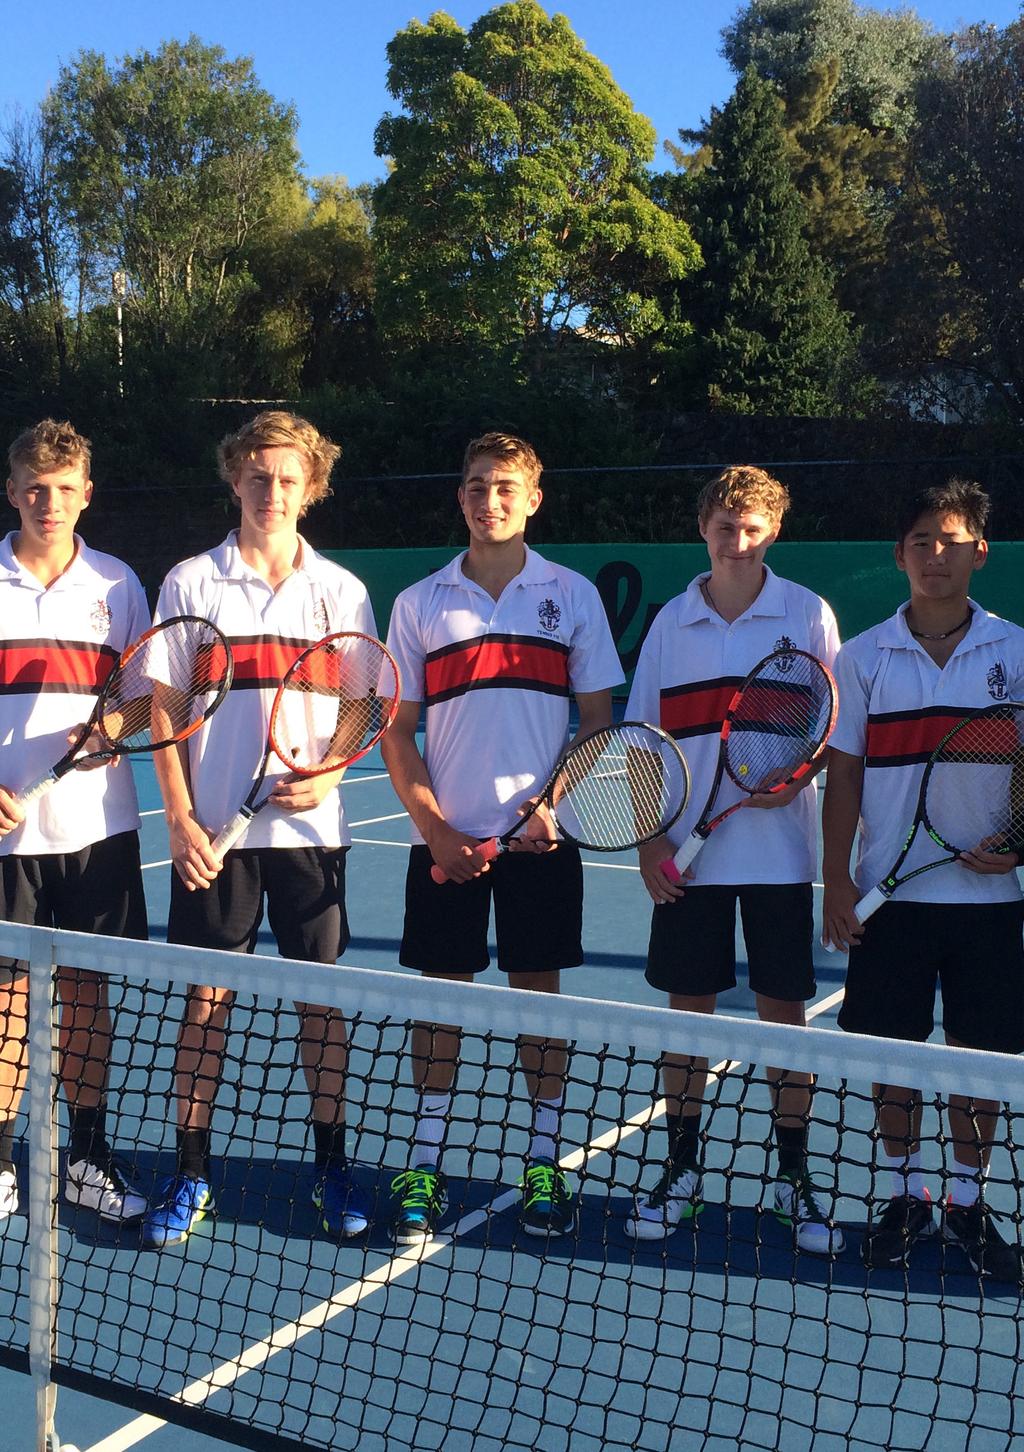 Welcome After securing another National Secondary Schools title in 2017, New Zealand s premier tennis academy (PLANiTPRO) have